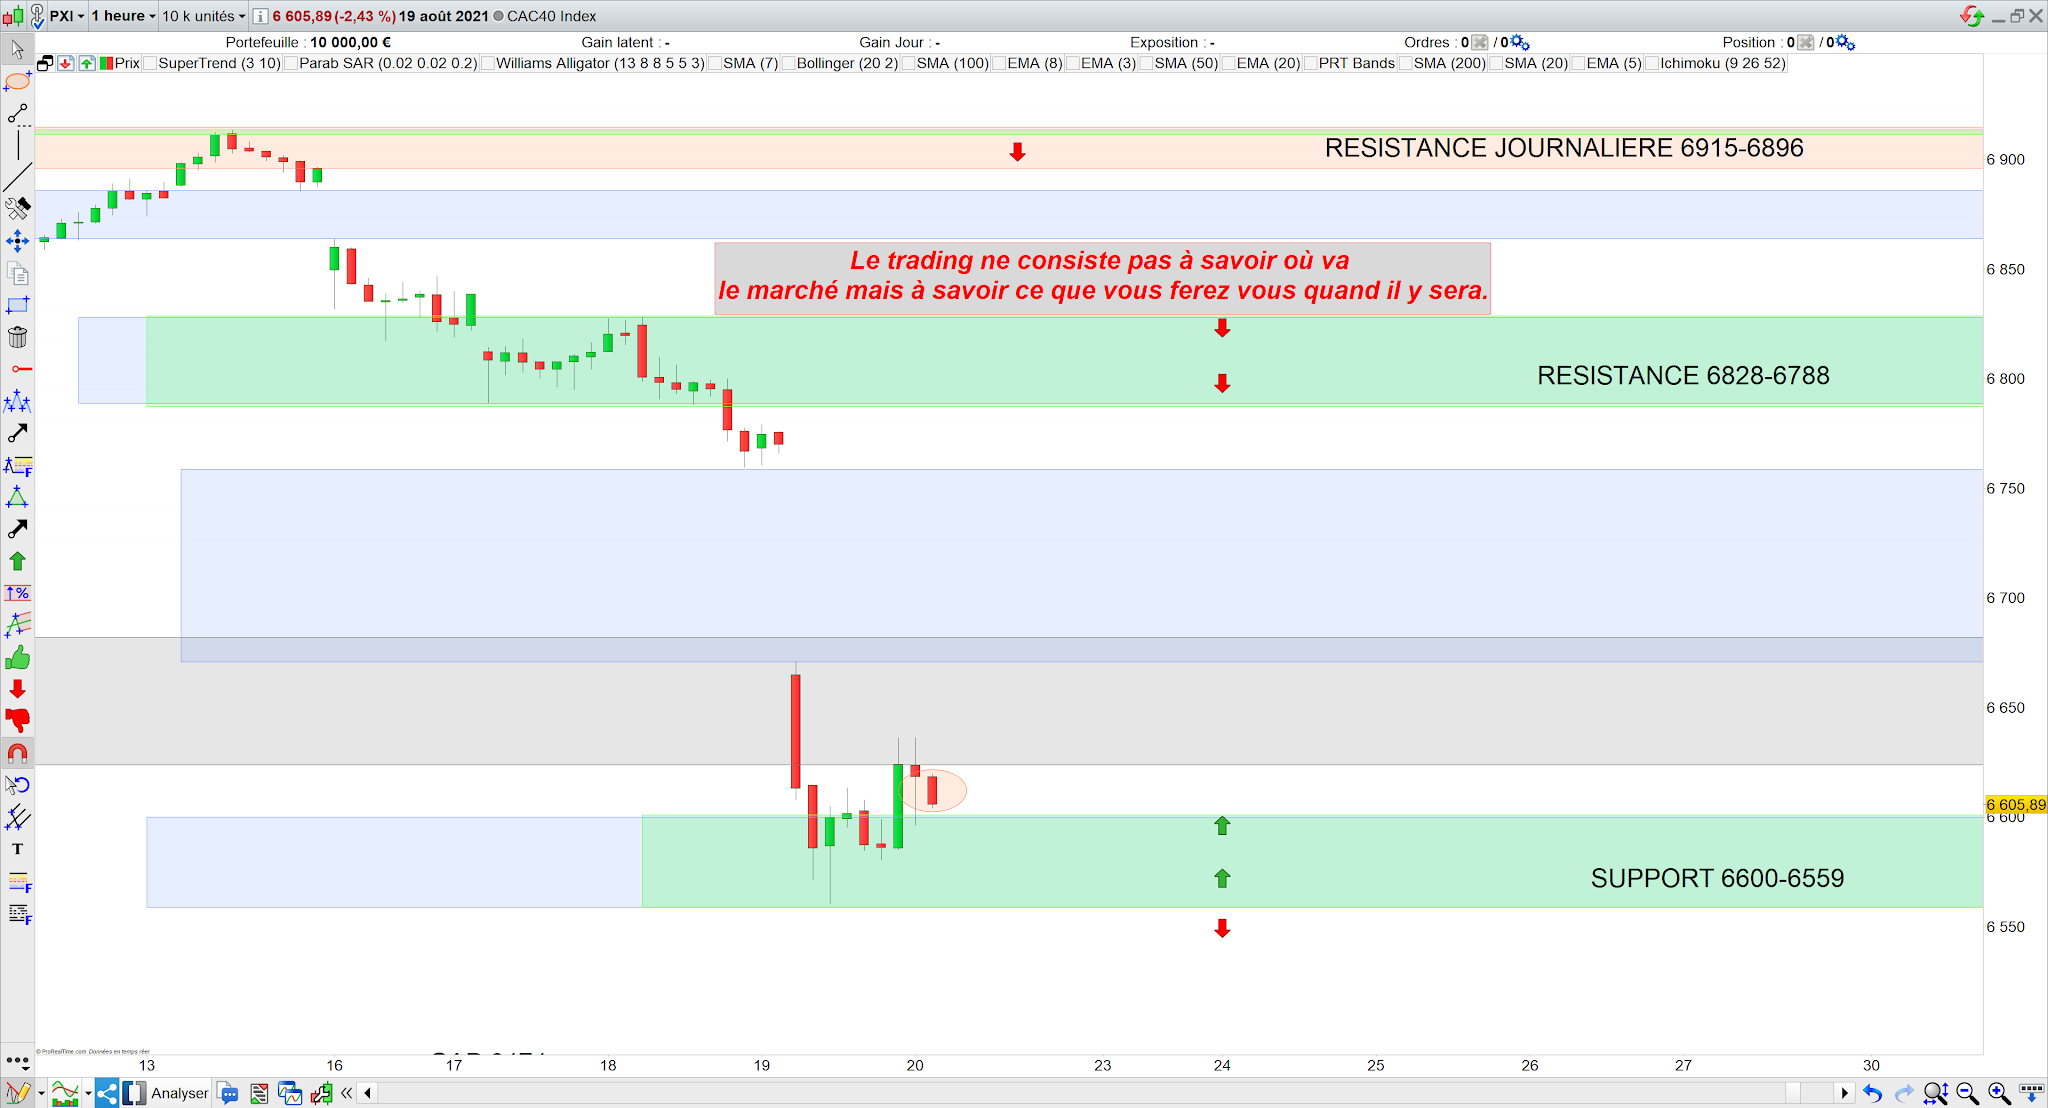 Trading cac40 20/08/21